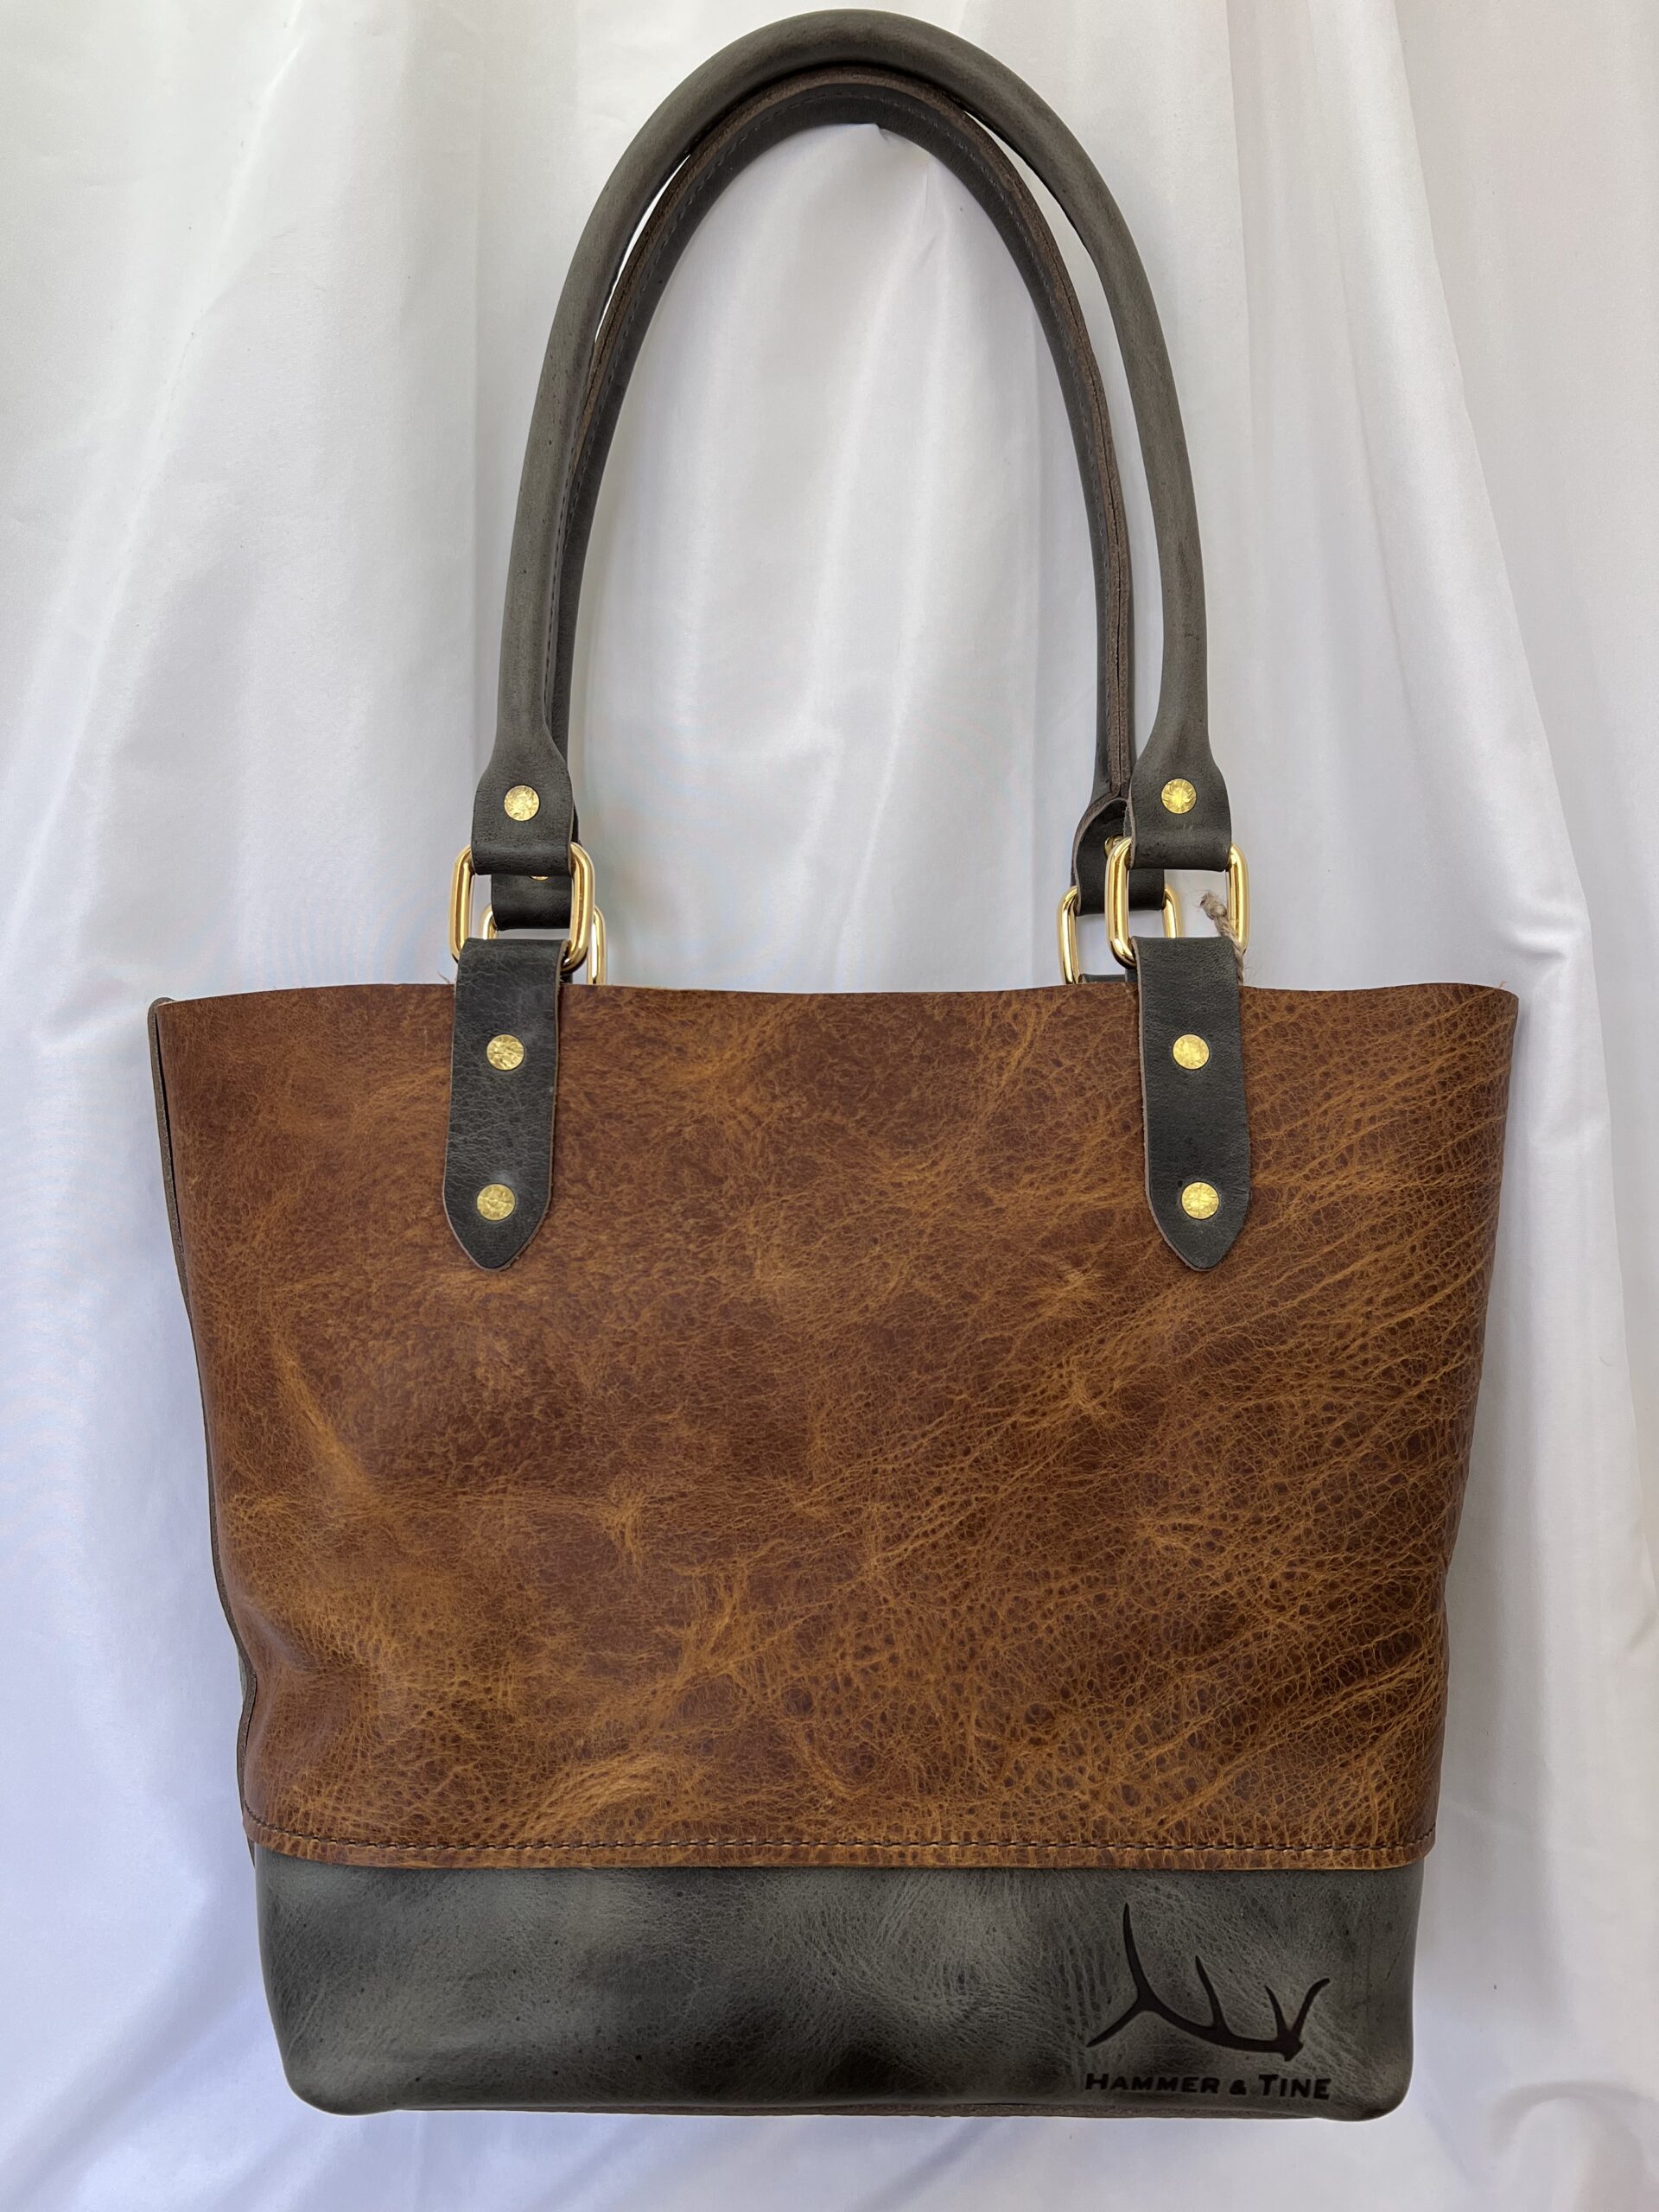 Medium brown and grey leather tote